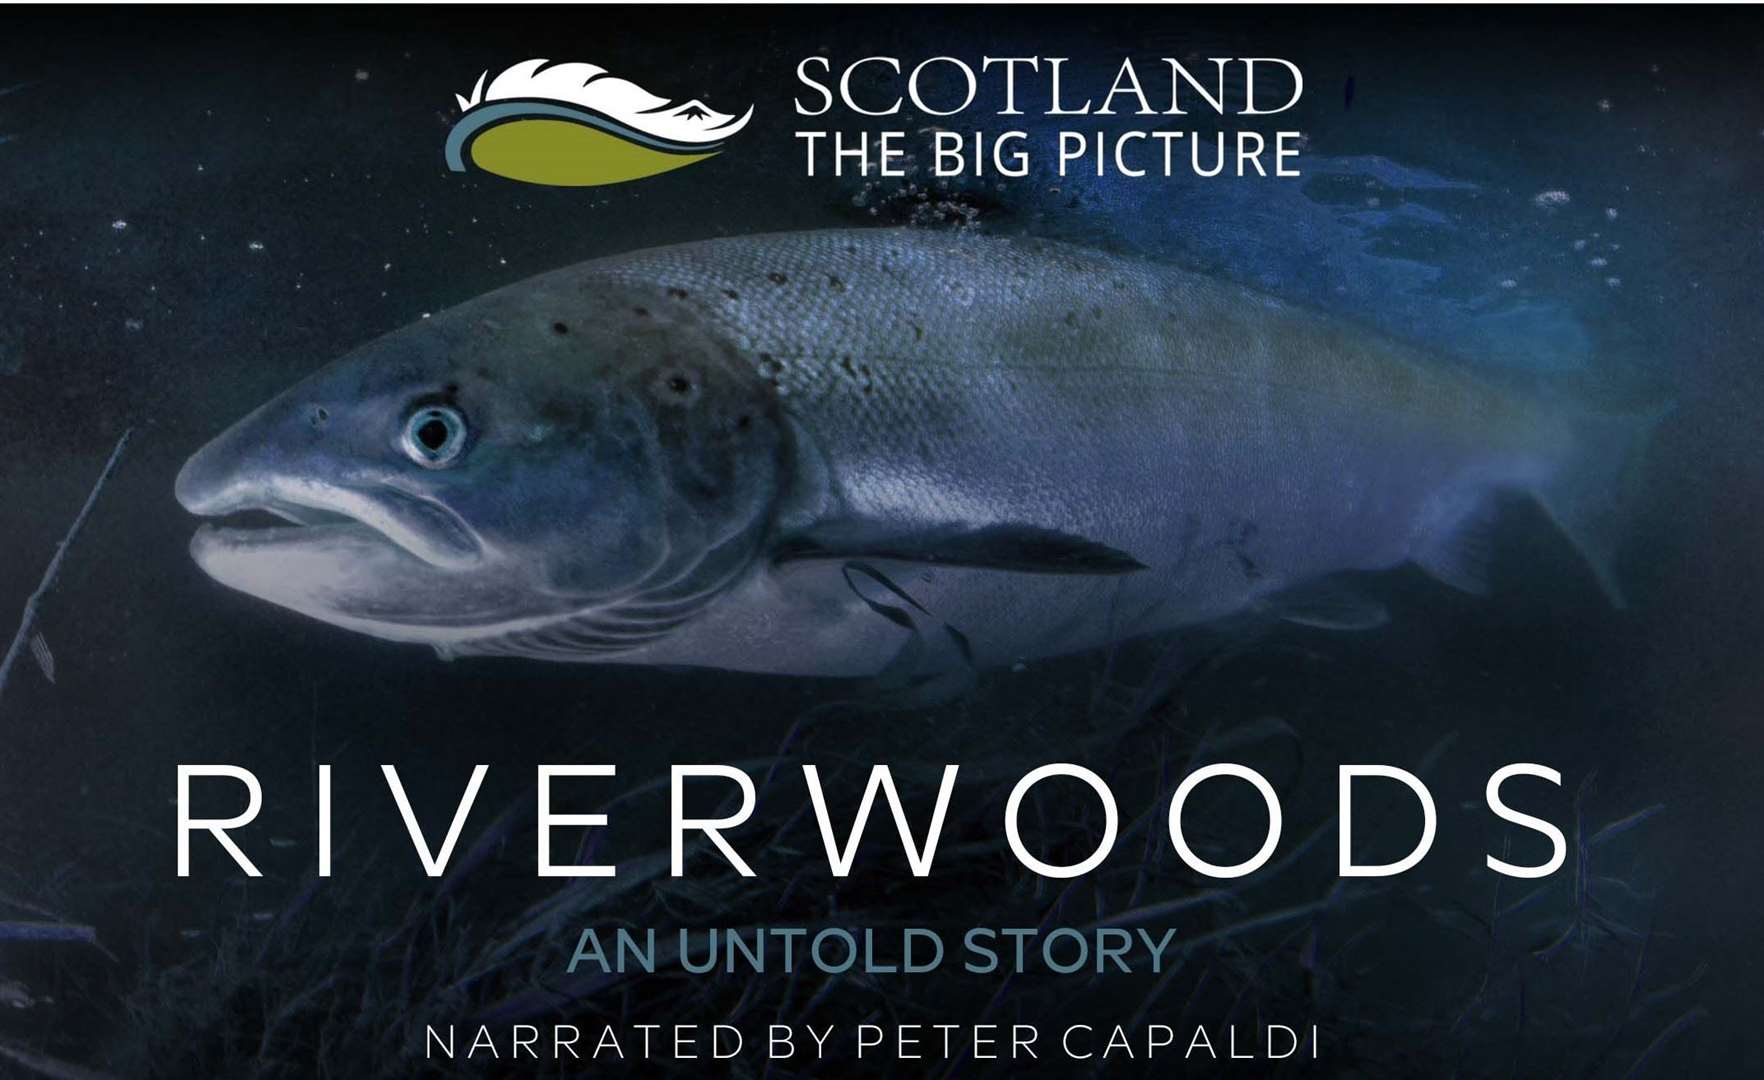 Riverwoods is the compelling story of Scotland’s Atlantic salmon and its role in the forest ecosystem.